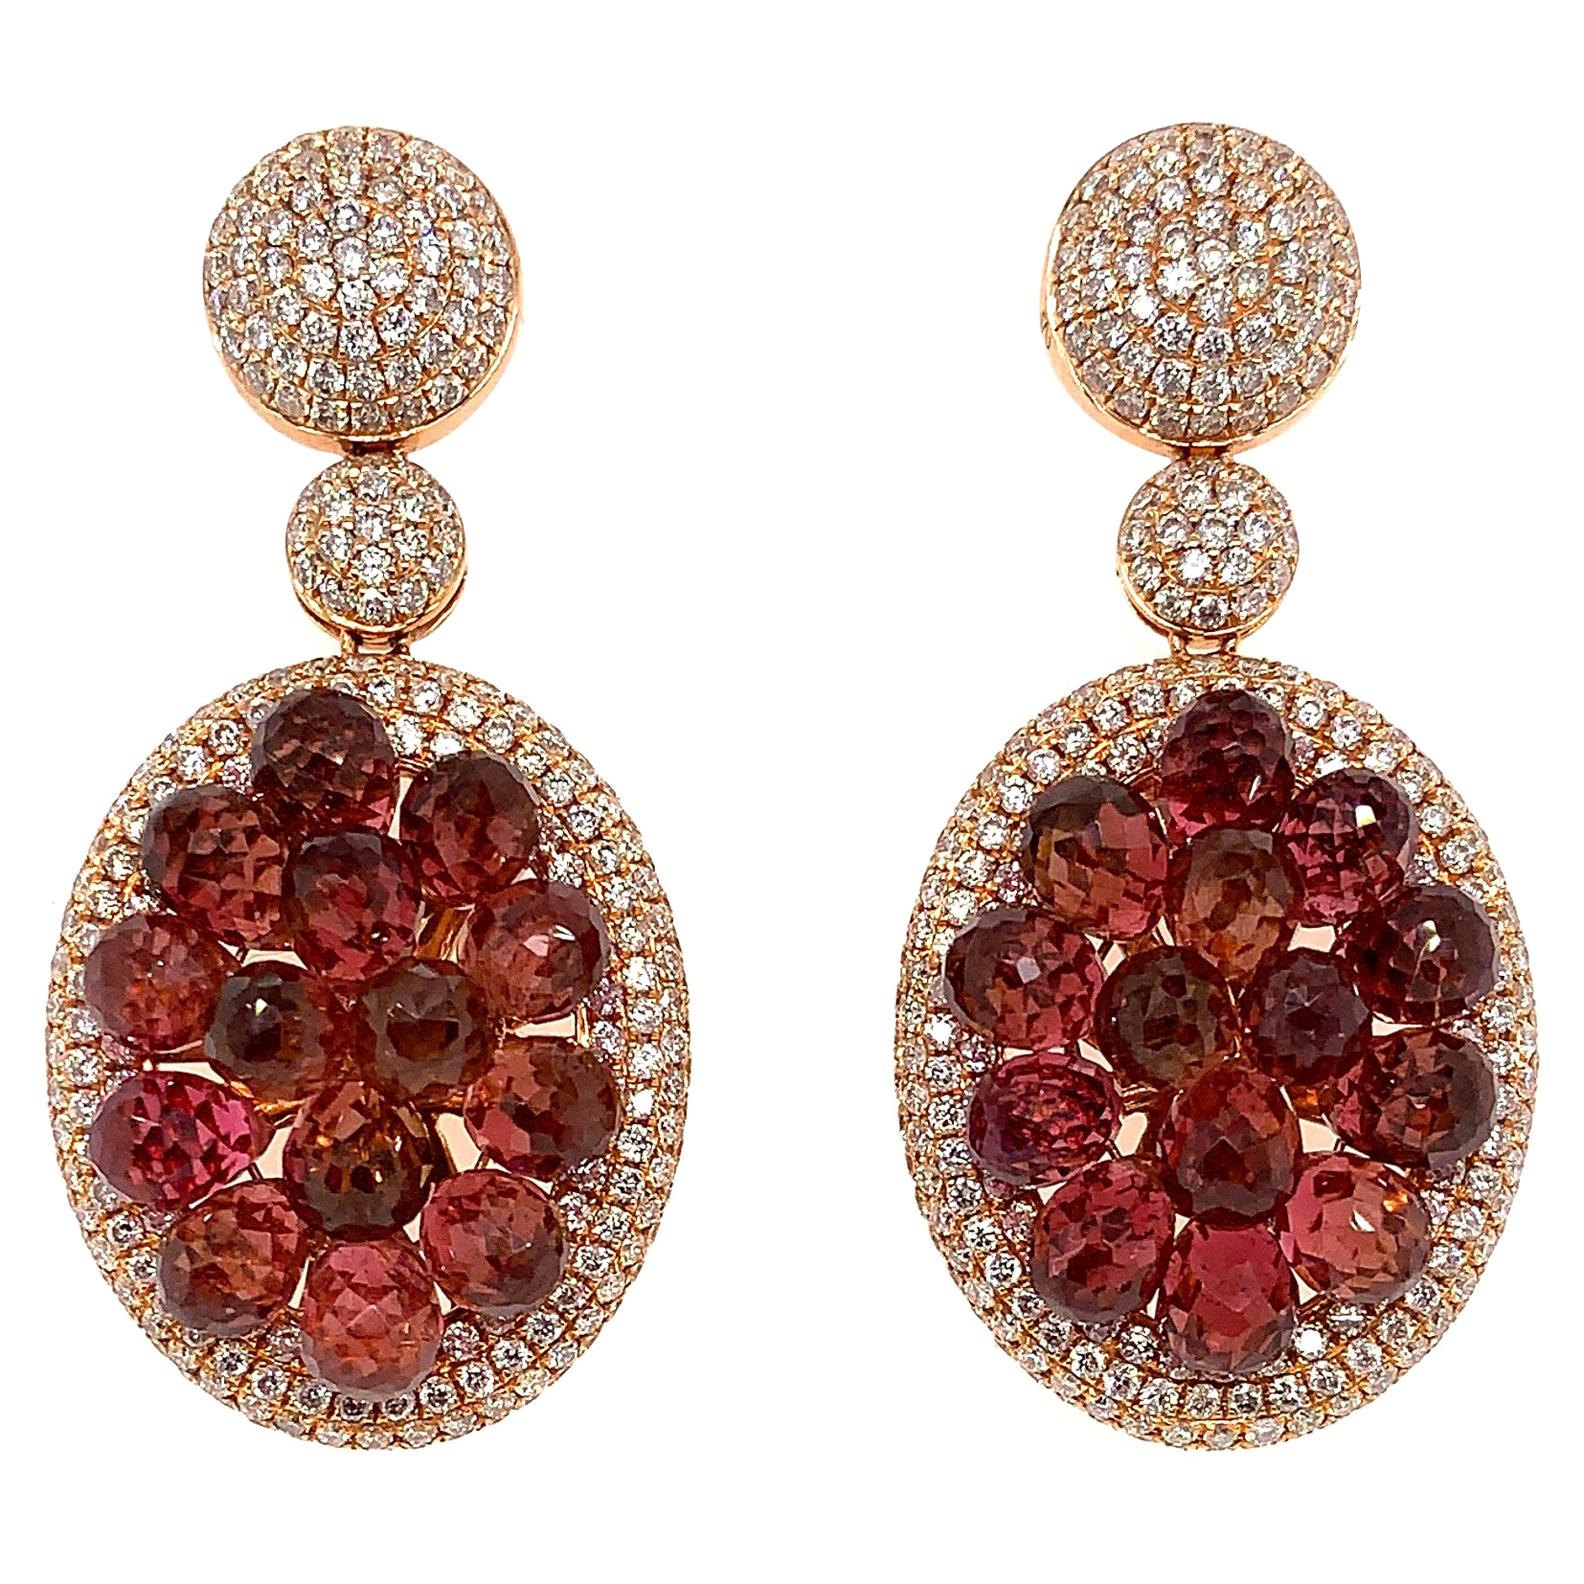 19.41 Carat Pink Tourmaline Earring in 18 Karat Rose Gold with Diamonds For Sale